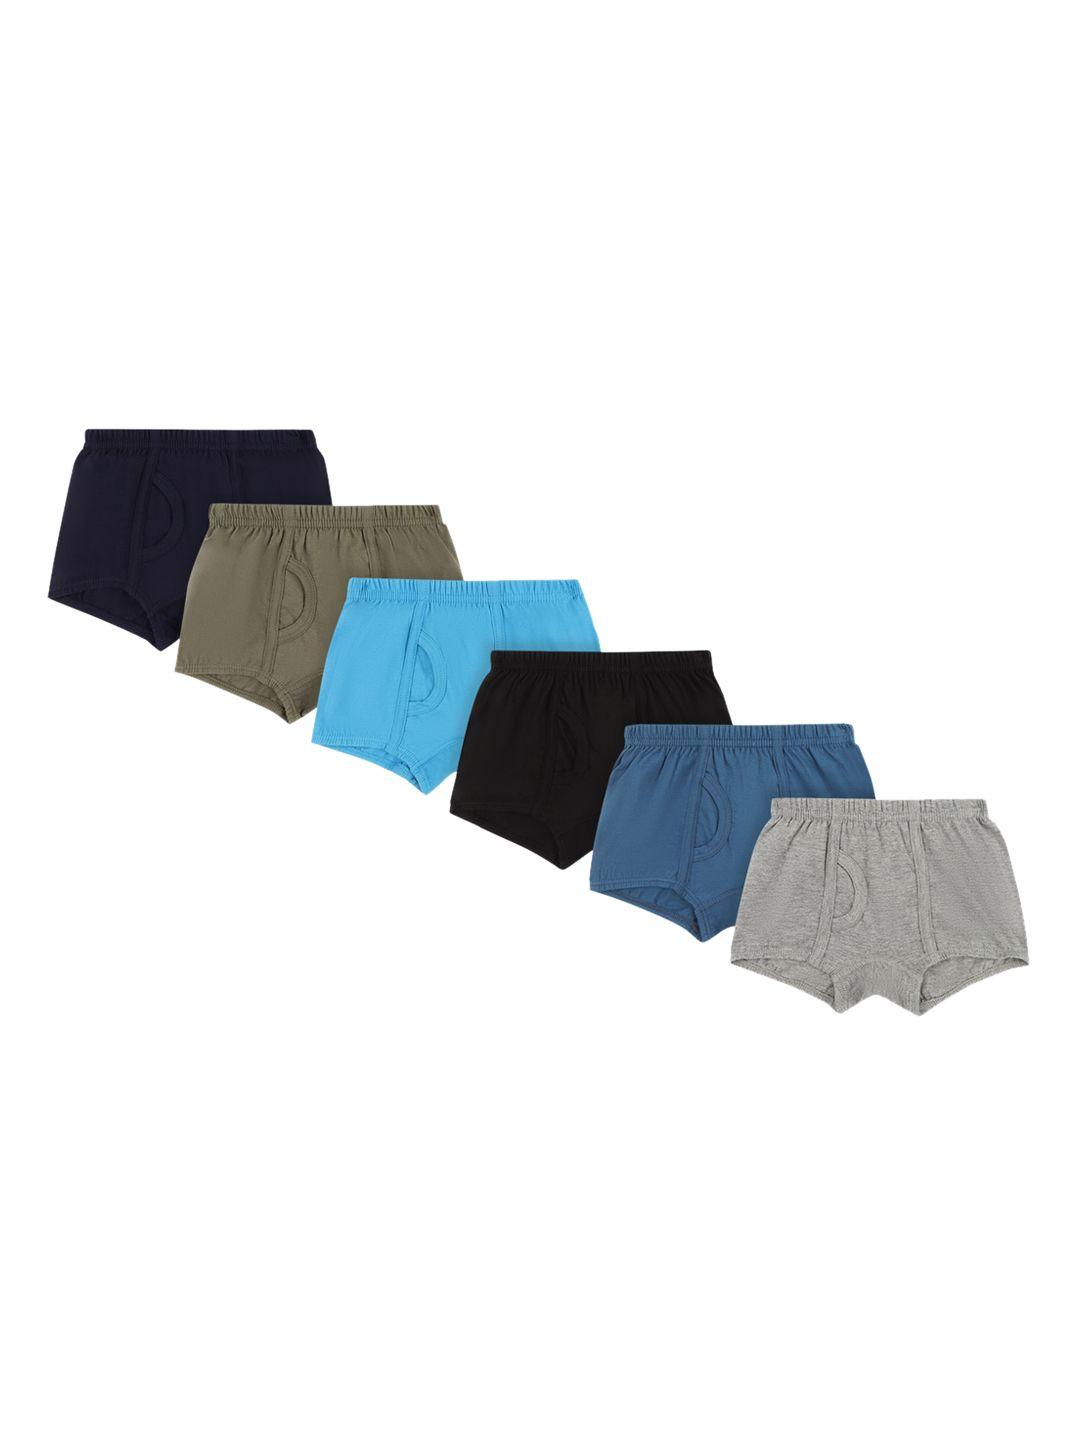 bodycare-kids-boys-pack-of-6-assorted-solid-cotton-trunk-kia004-pk009_p6